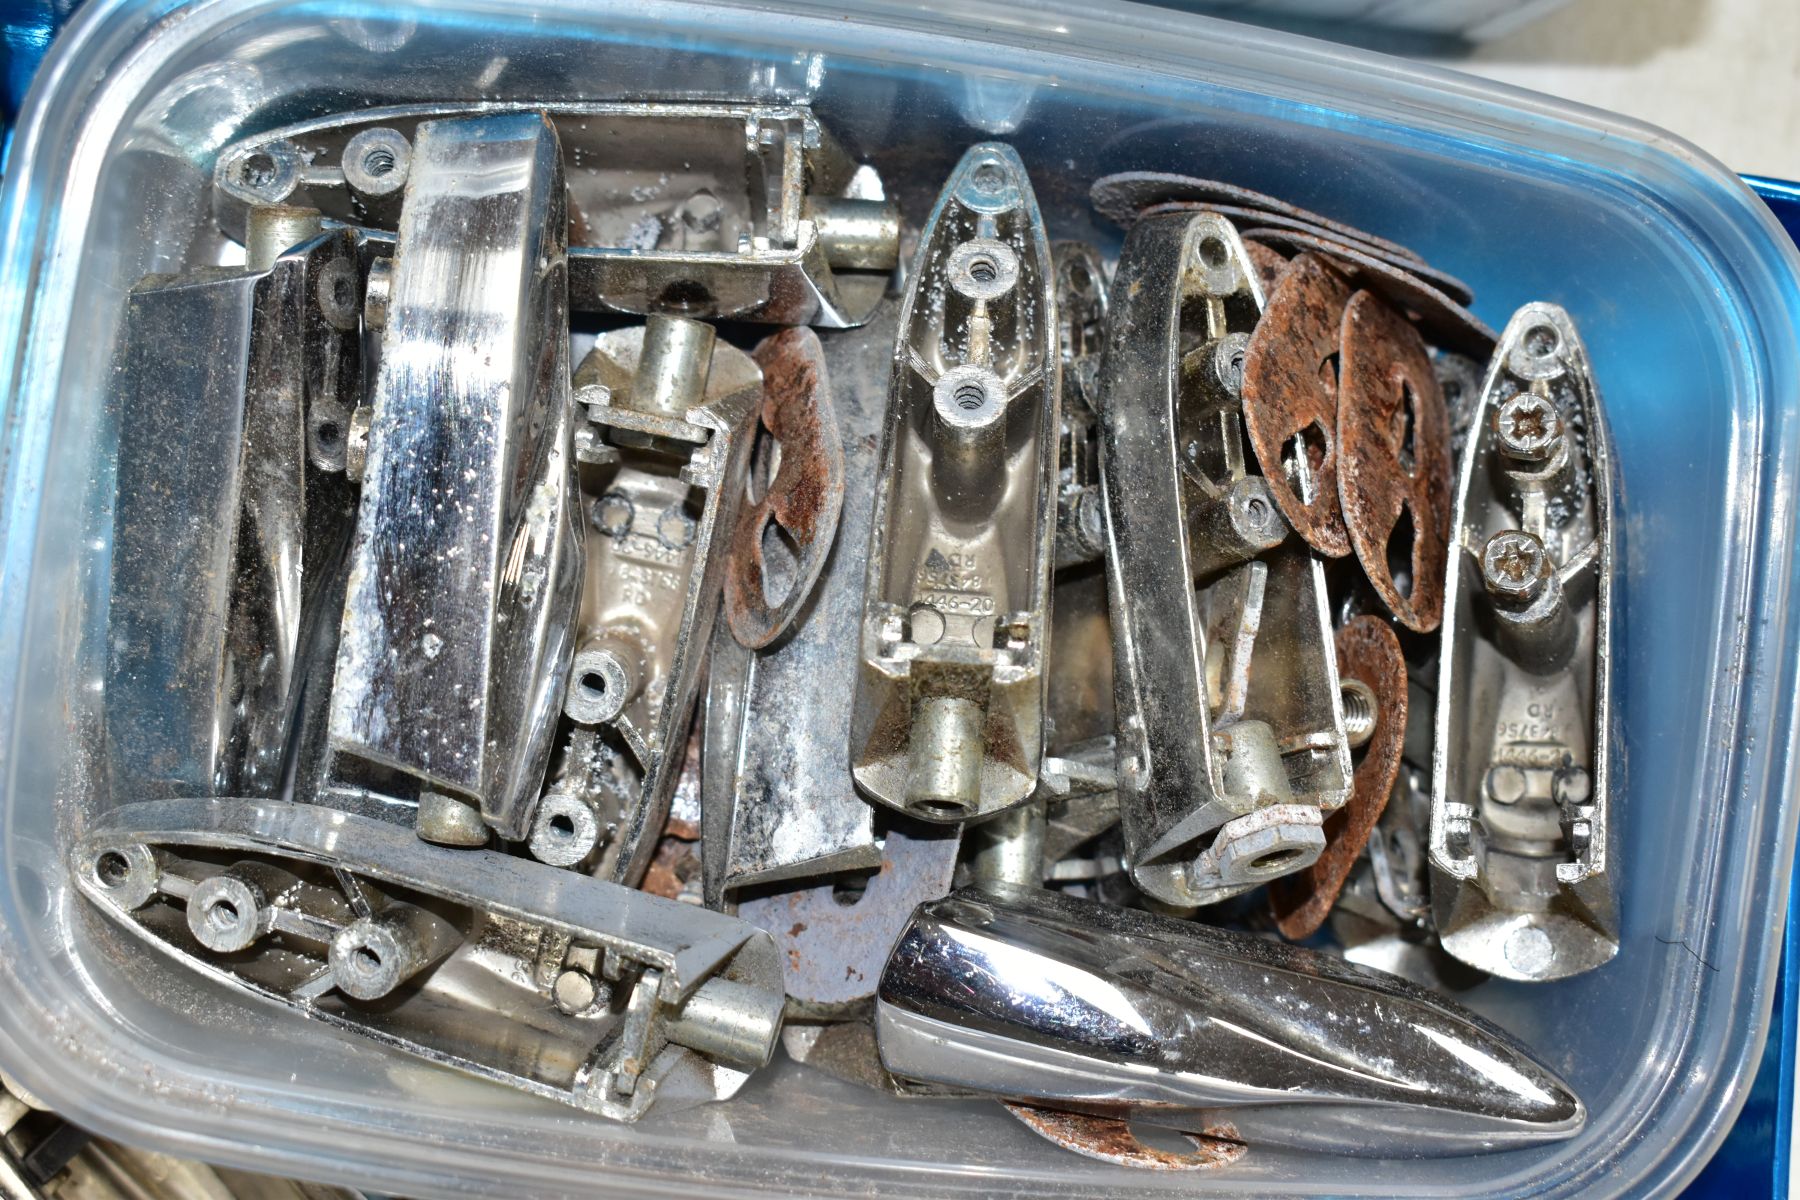 TWO TRAYS CONTAINING VINTAGE DRUM LUGS AND BOLTS, including Beverley, Pearl, etc - Image 4 of 5